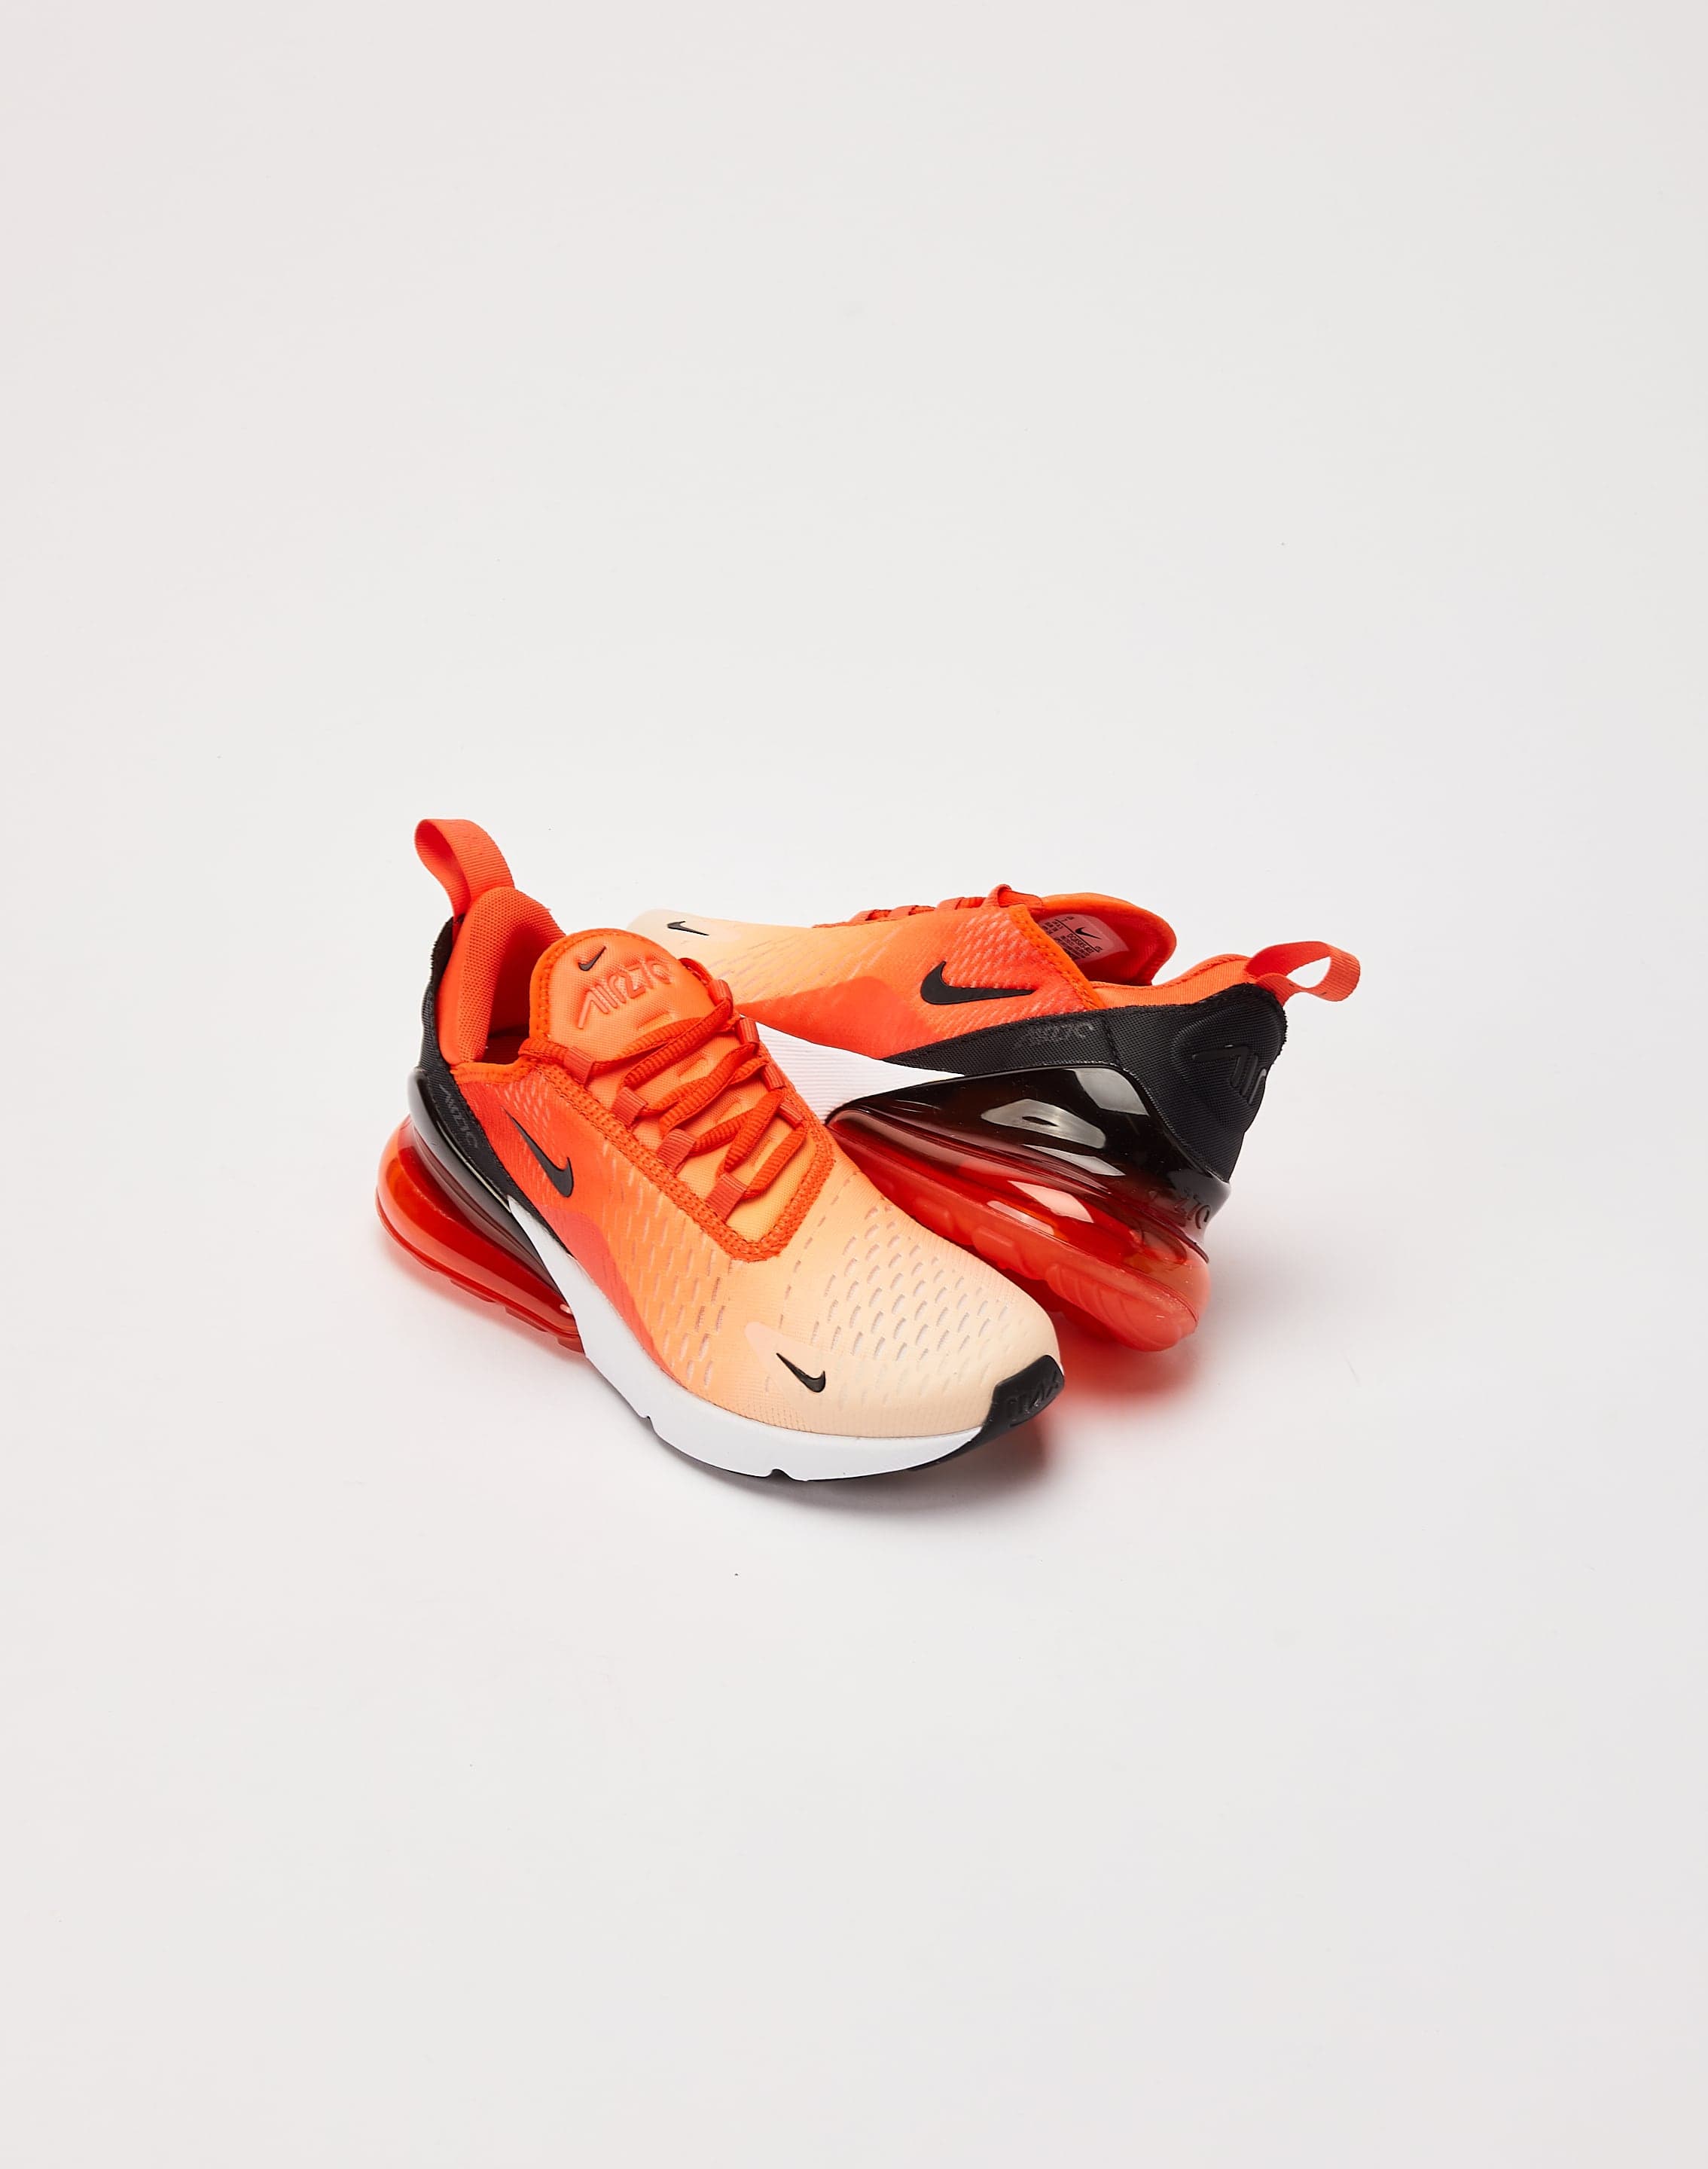 Now Available: Nike Air Max 270 Total Orange — Sneaker Shouts